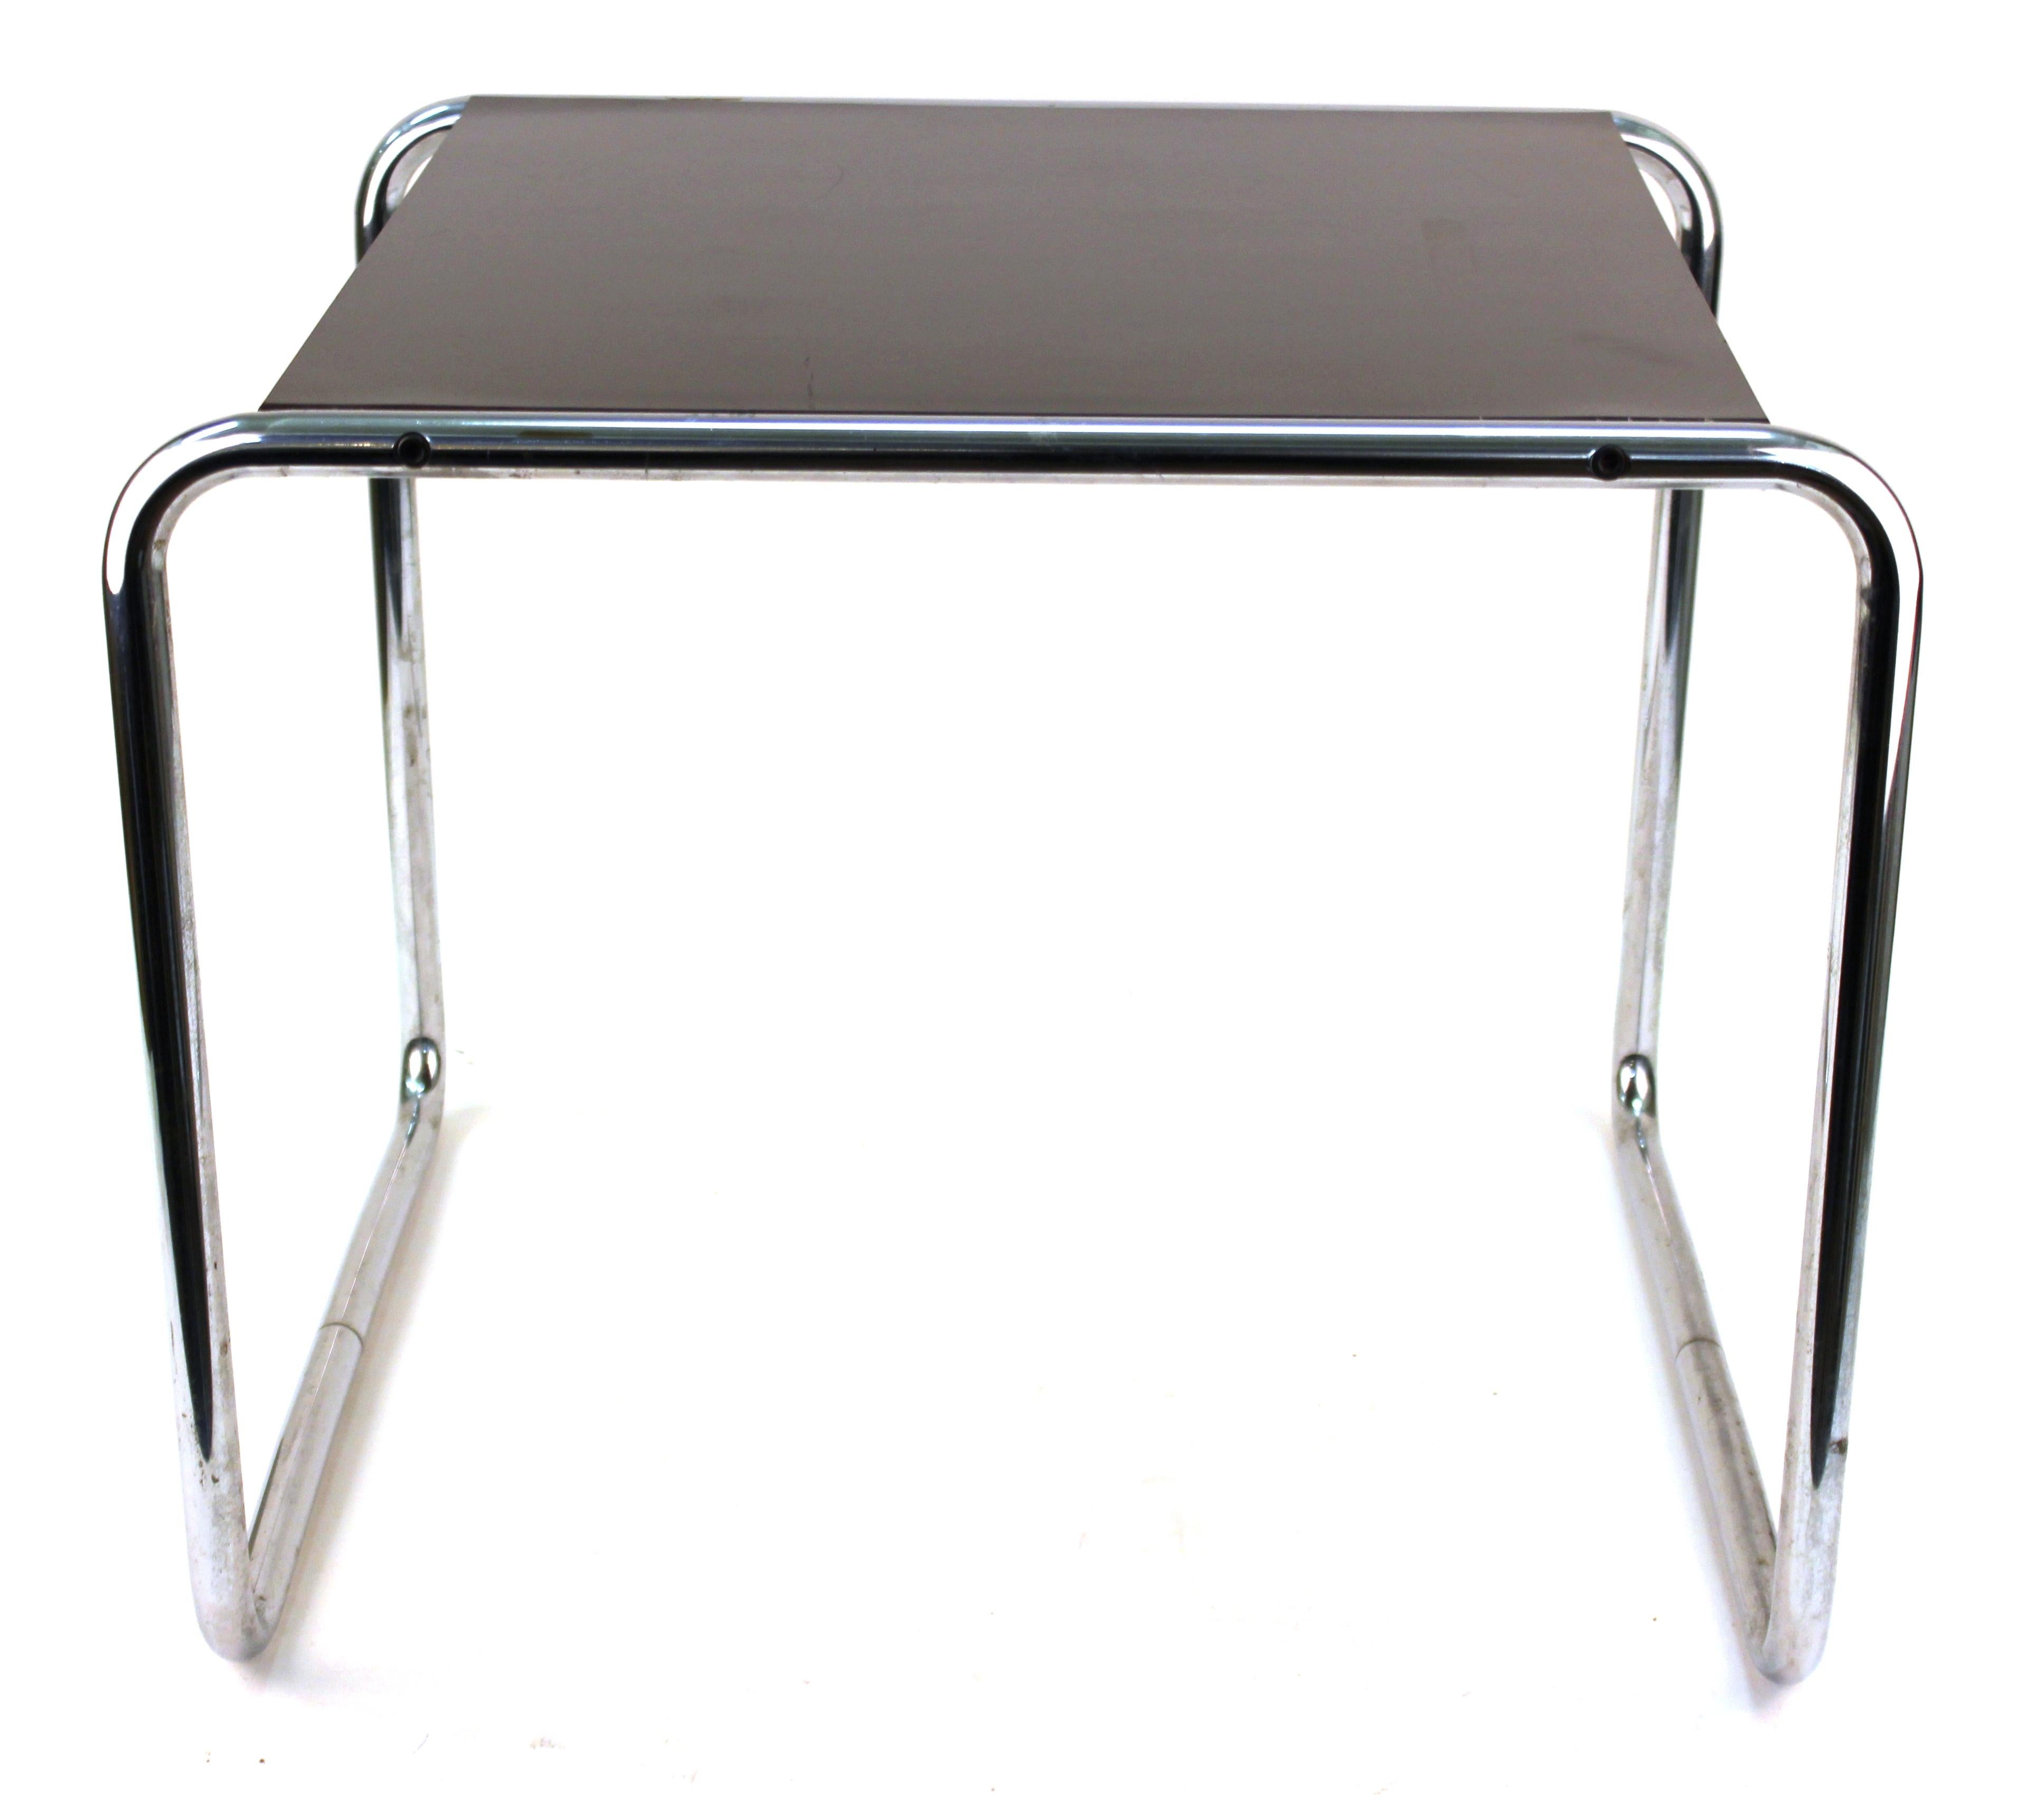 Modern 'Laccio' side table designed by Marcel Breuer for Italian maker Gavina in black laminated wood top with a tubular steel frame. The piece dates from the 1960s and has part of its original makers label on the bottom. In great vintage condition